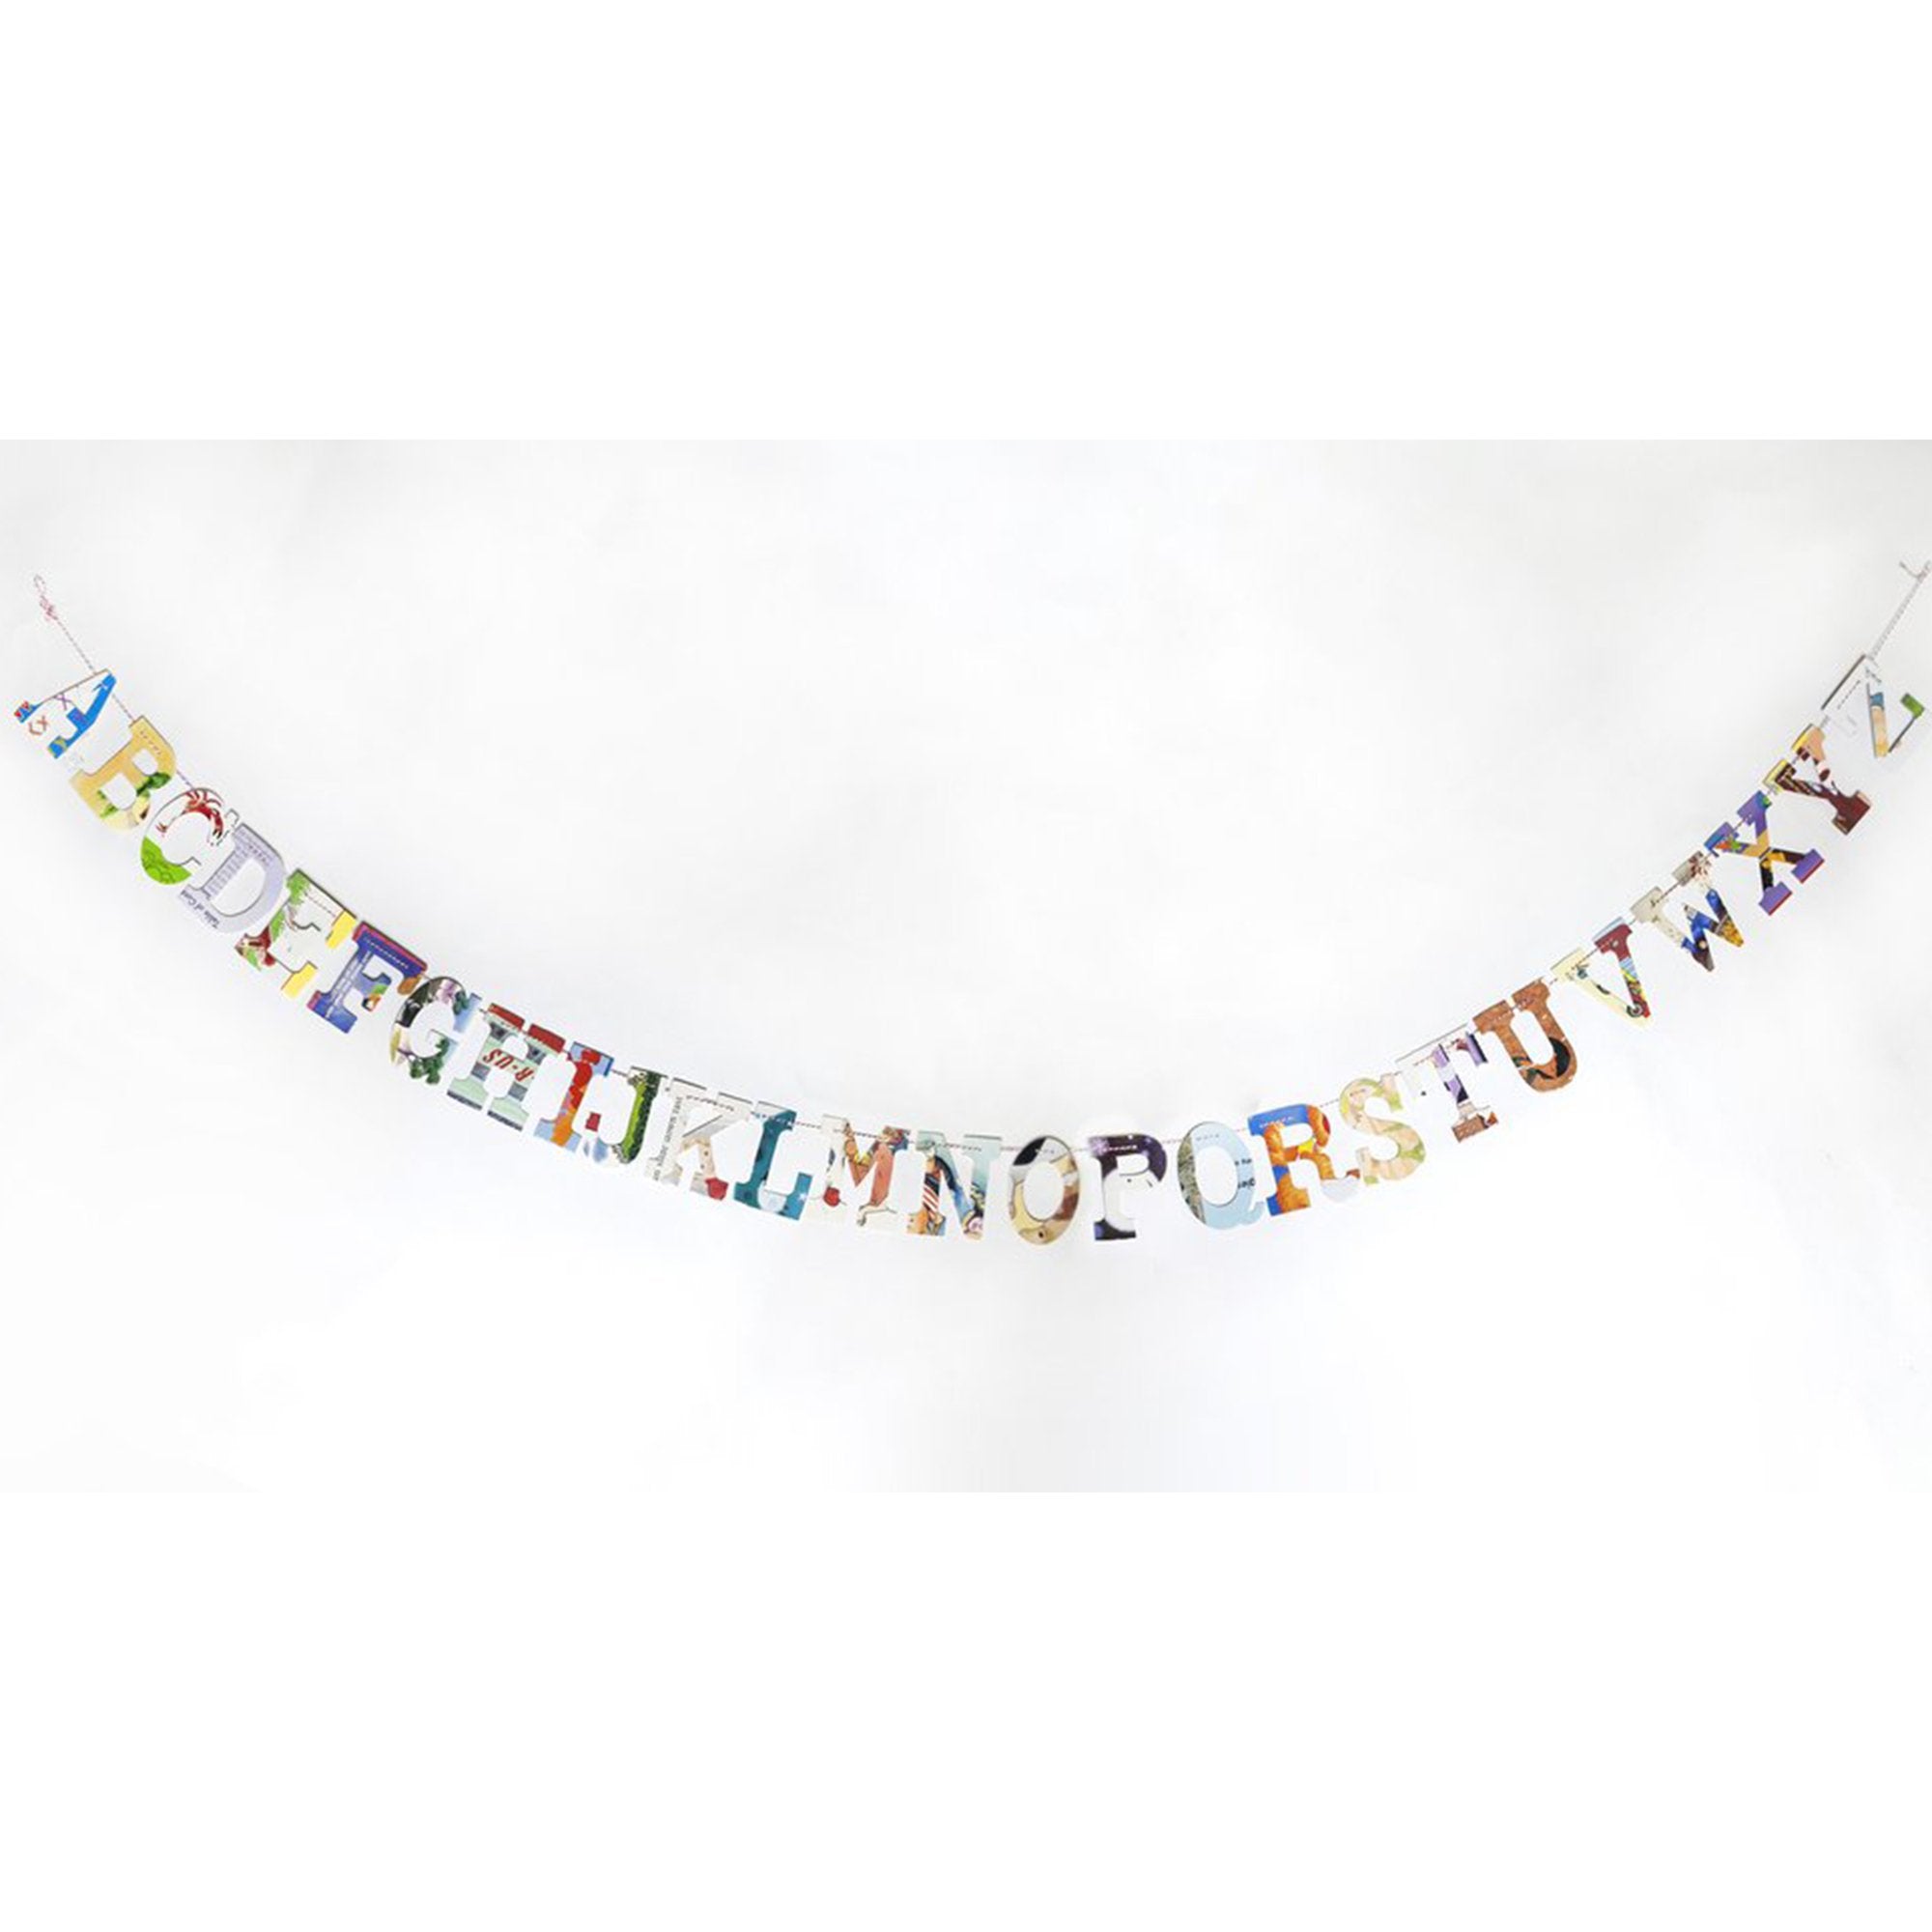 multi-colored, collage style alphabet garland displayed  hanging on white wall